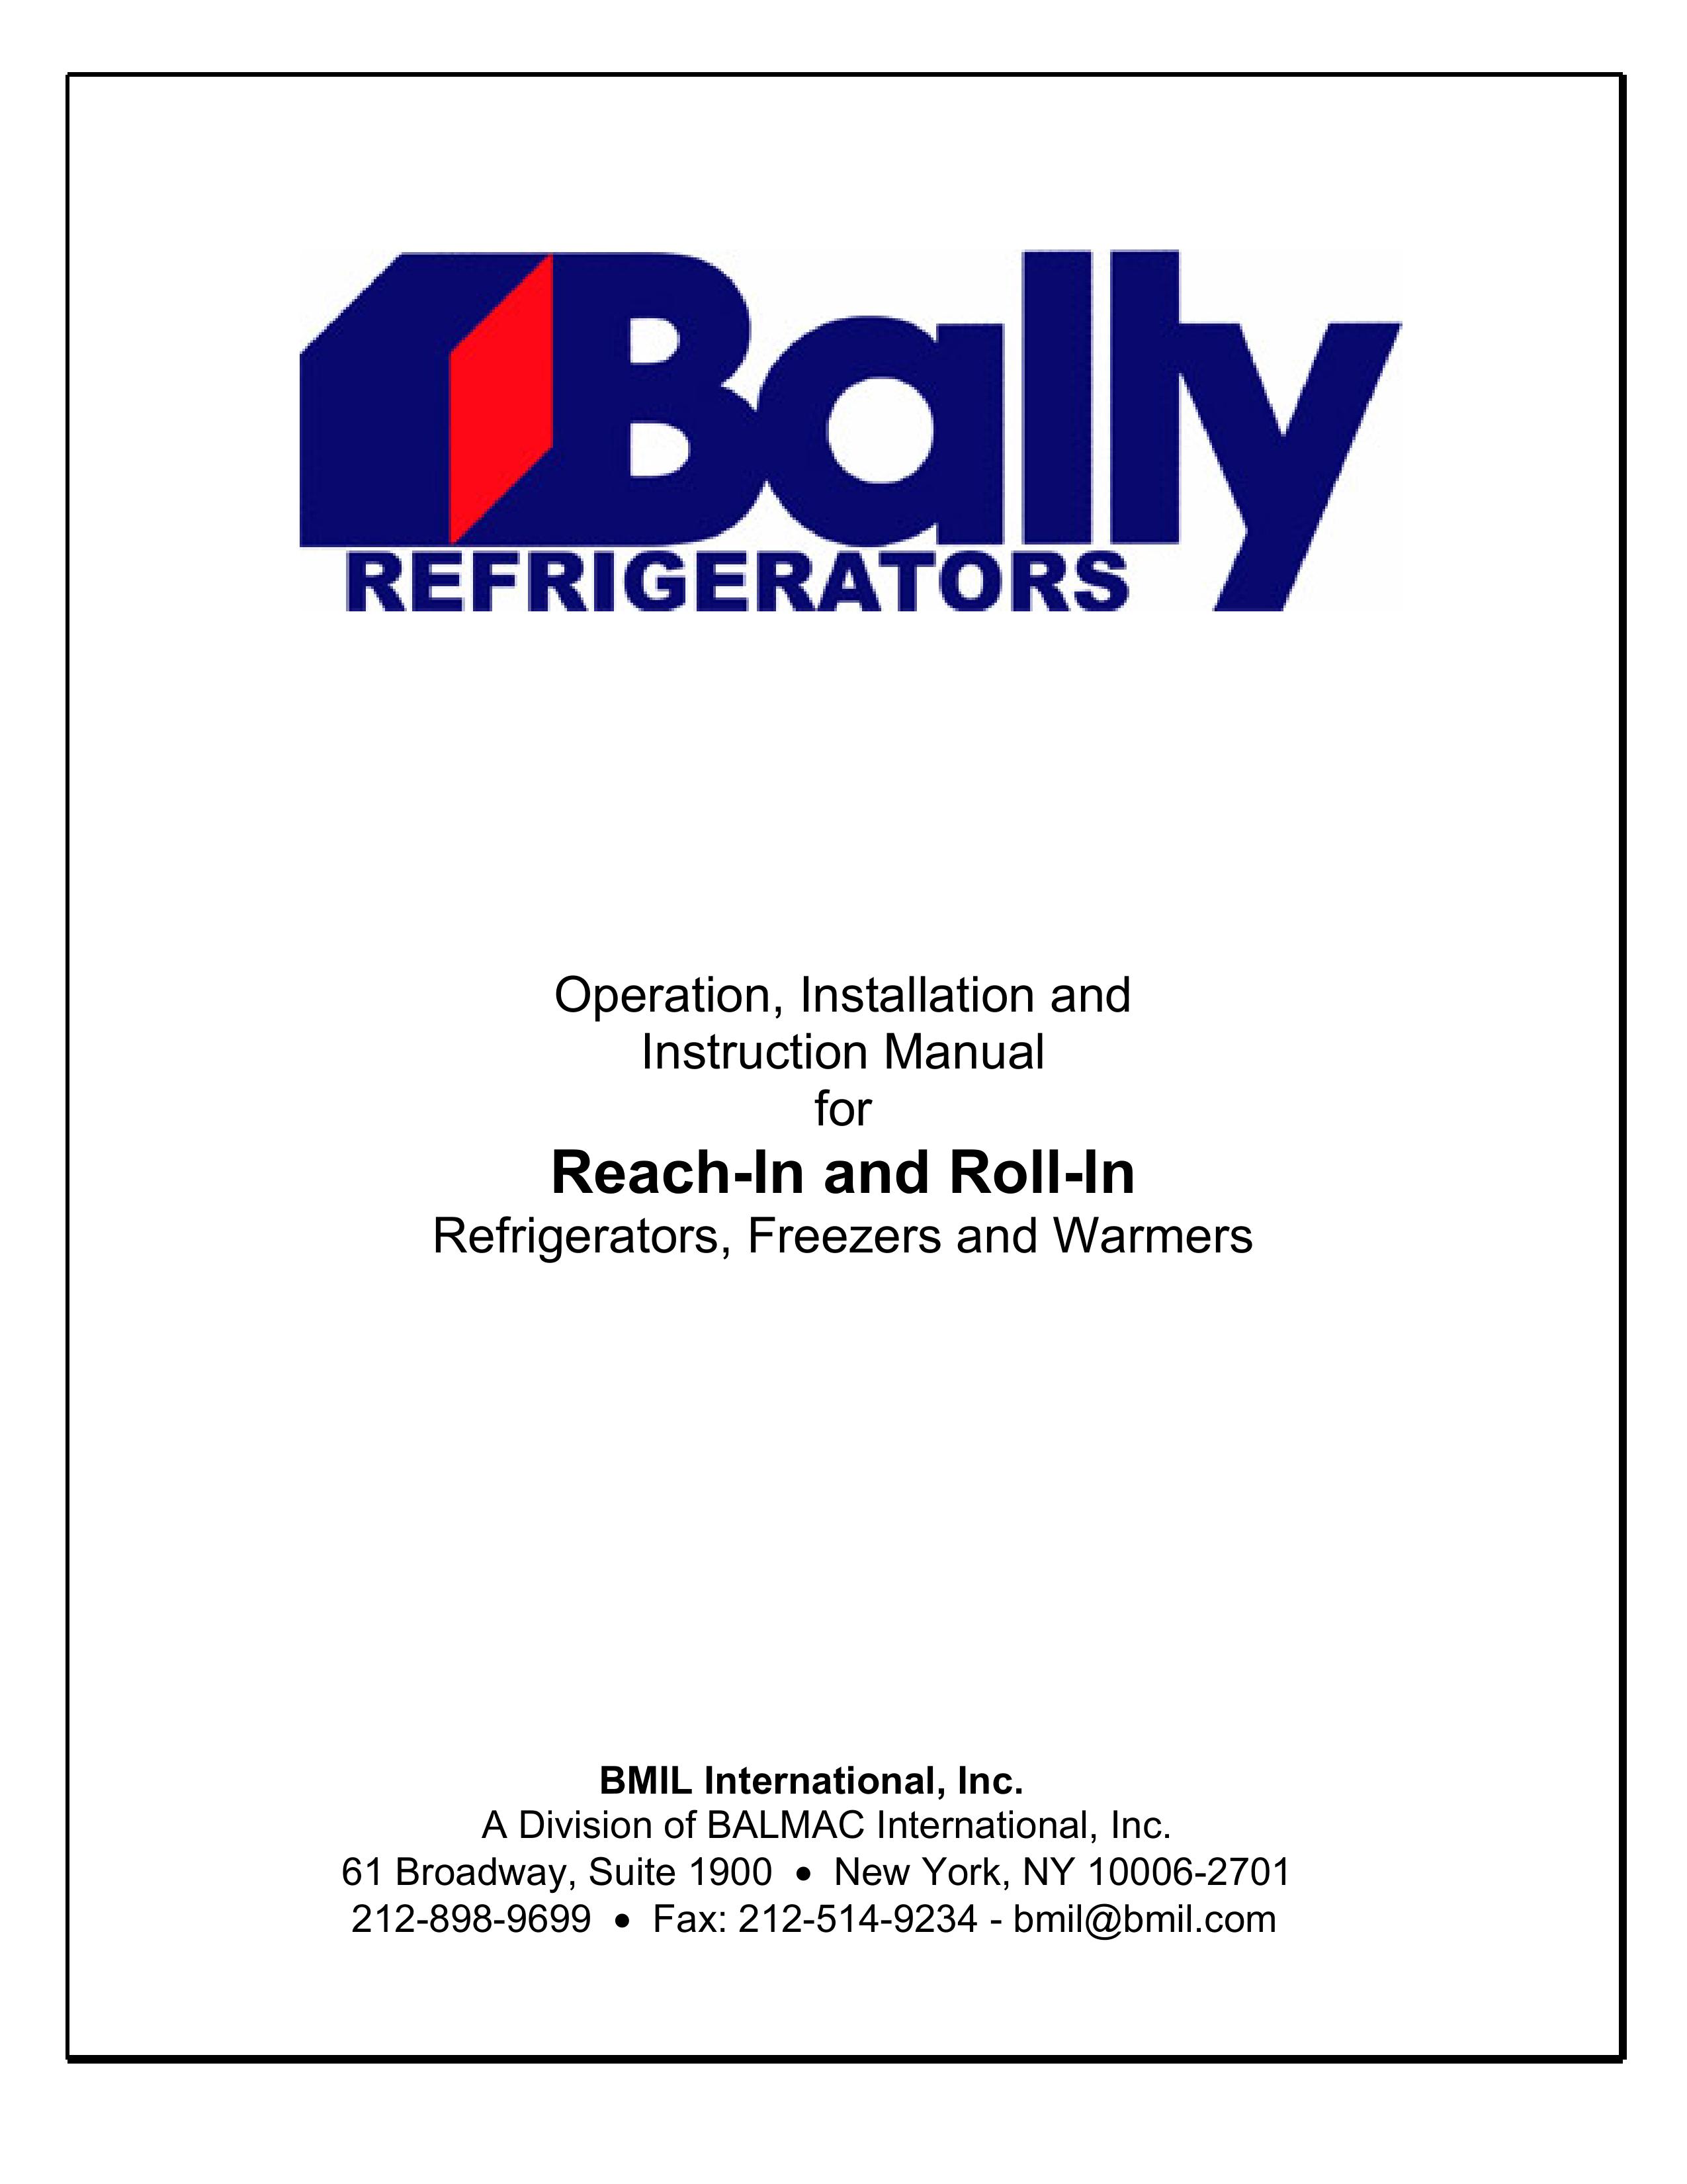 Bally Refrigerated Boxes Refrigerators/Freezers/Warmers Refrigerator User Manual